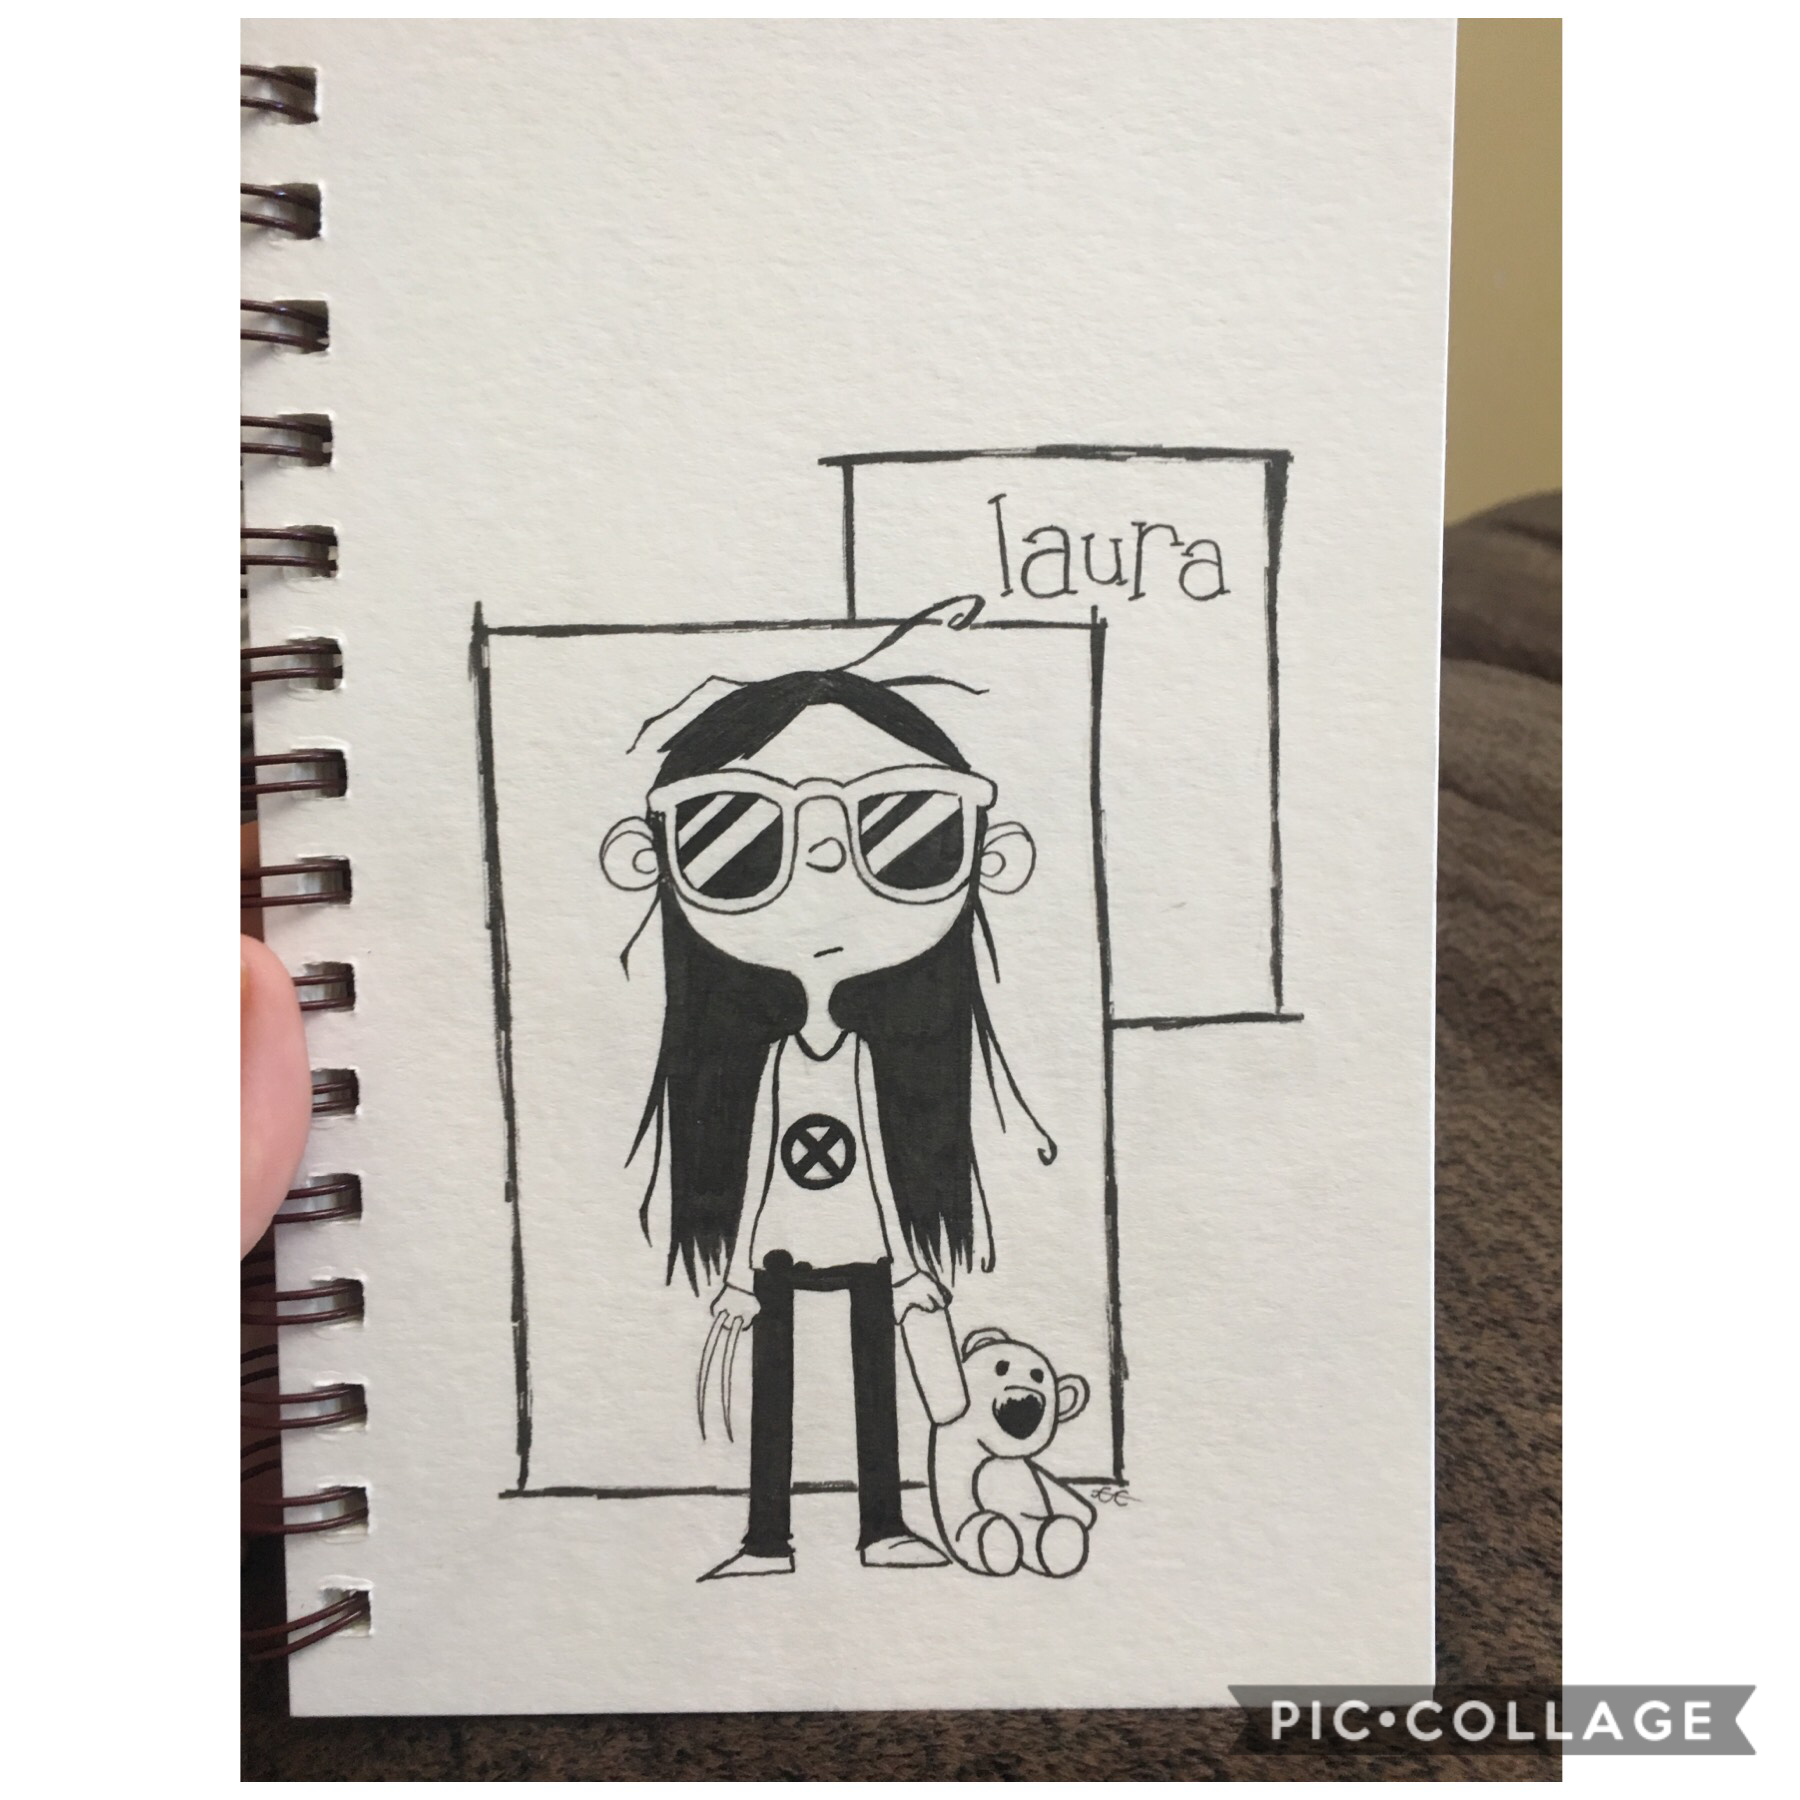 I’ve returned! And with another drawing: Laura Howlett. (aka X-23) 

Inspiration from Skottie Young